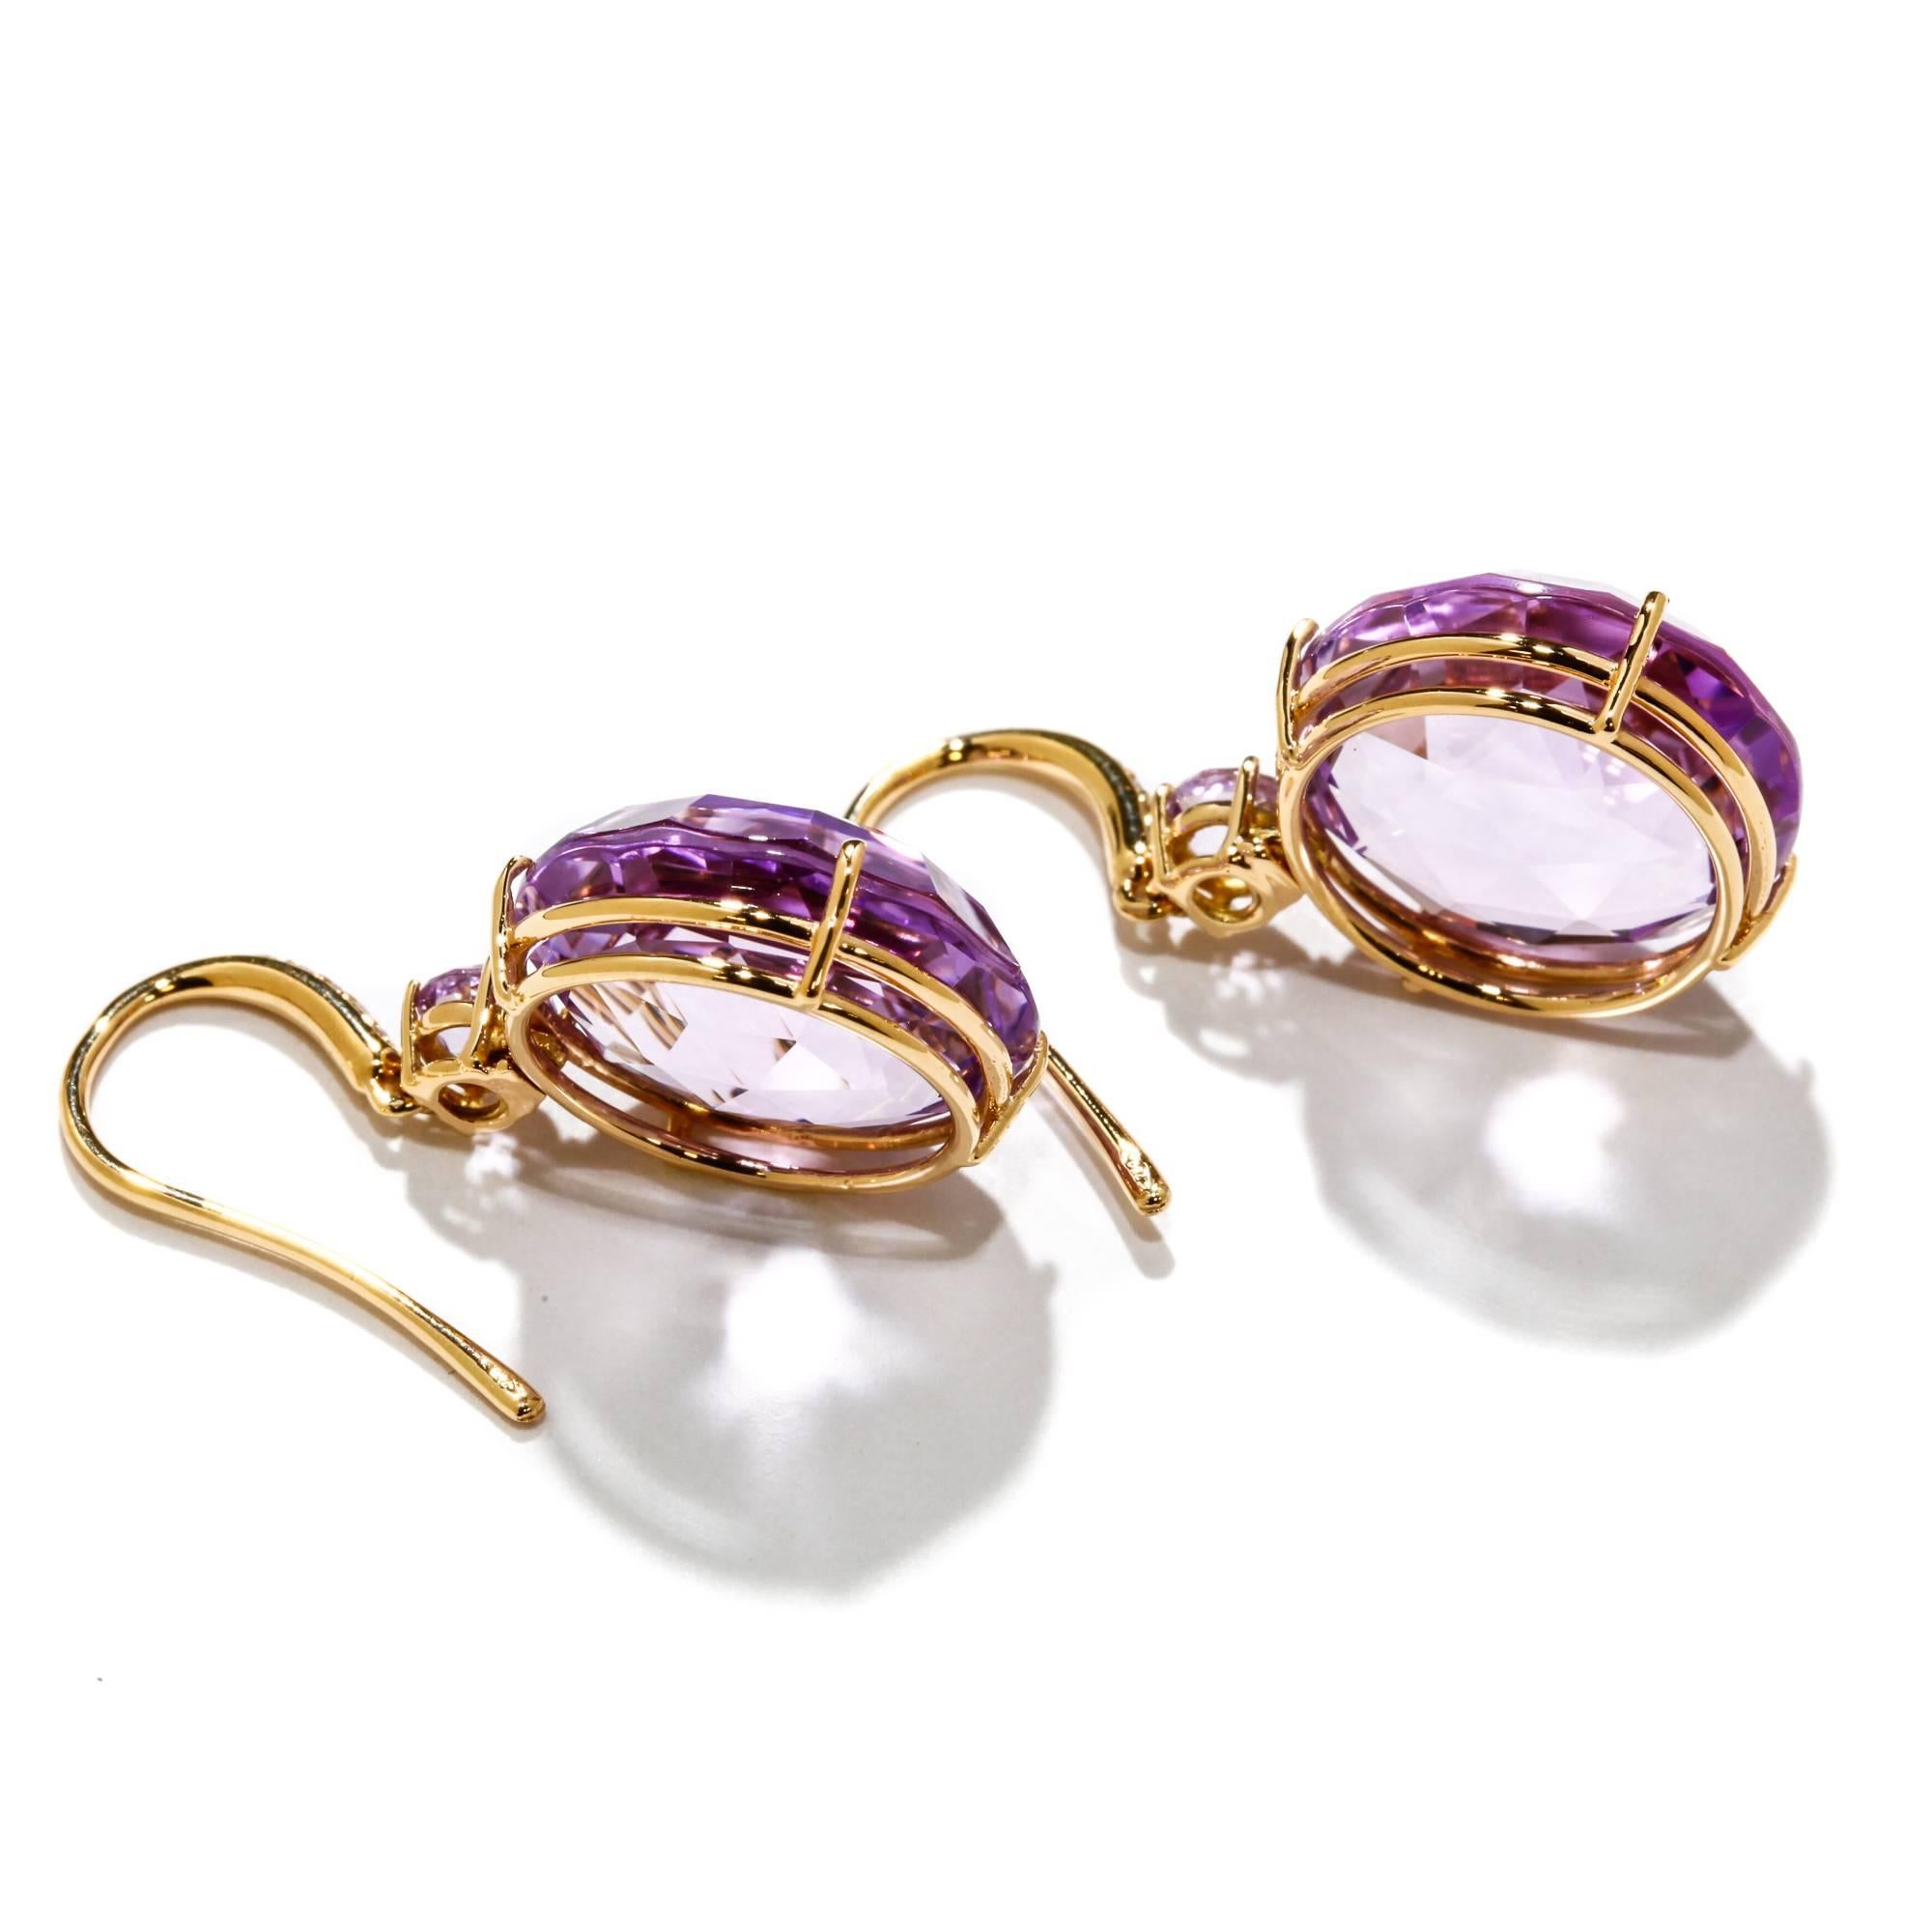 These A & Furst drop earrings feature four rose cut rose de France (light purple amethyst) stones totaling 21.00 ct. highlighted by 0.04 ct. of round diamonds, all set in 18k rose gold. A & Furst jewelry is designed in Napa Valley and handmade in